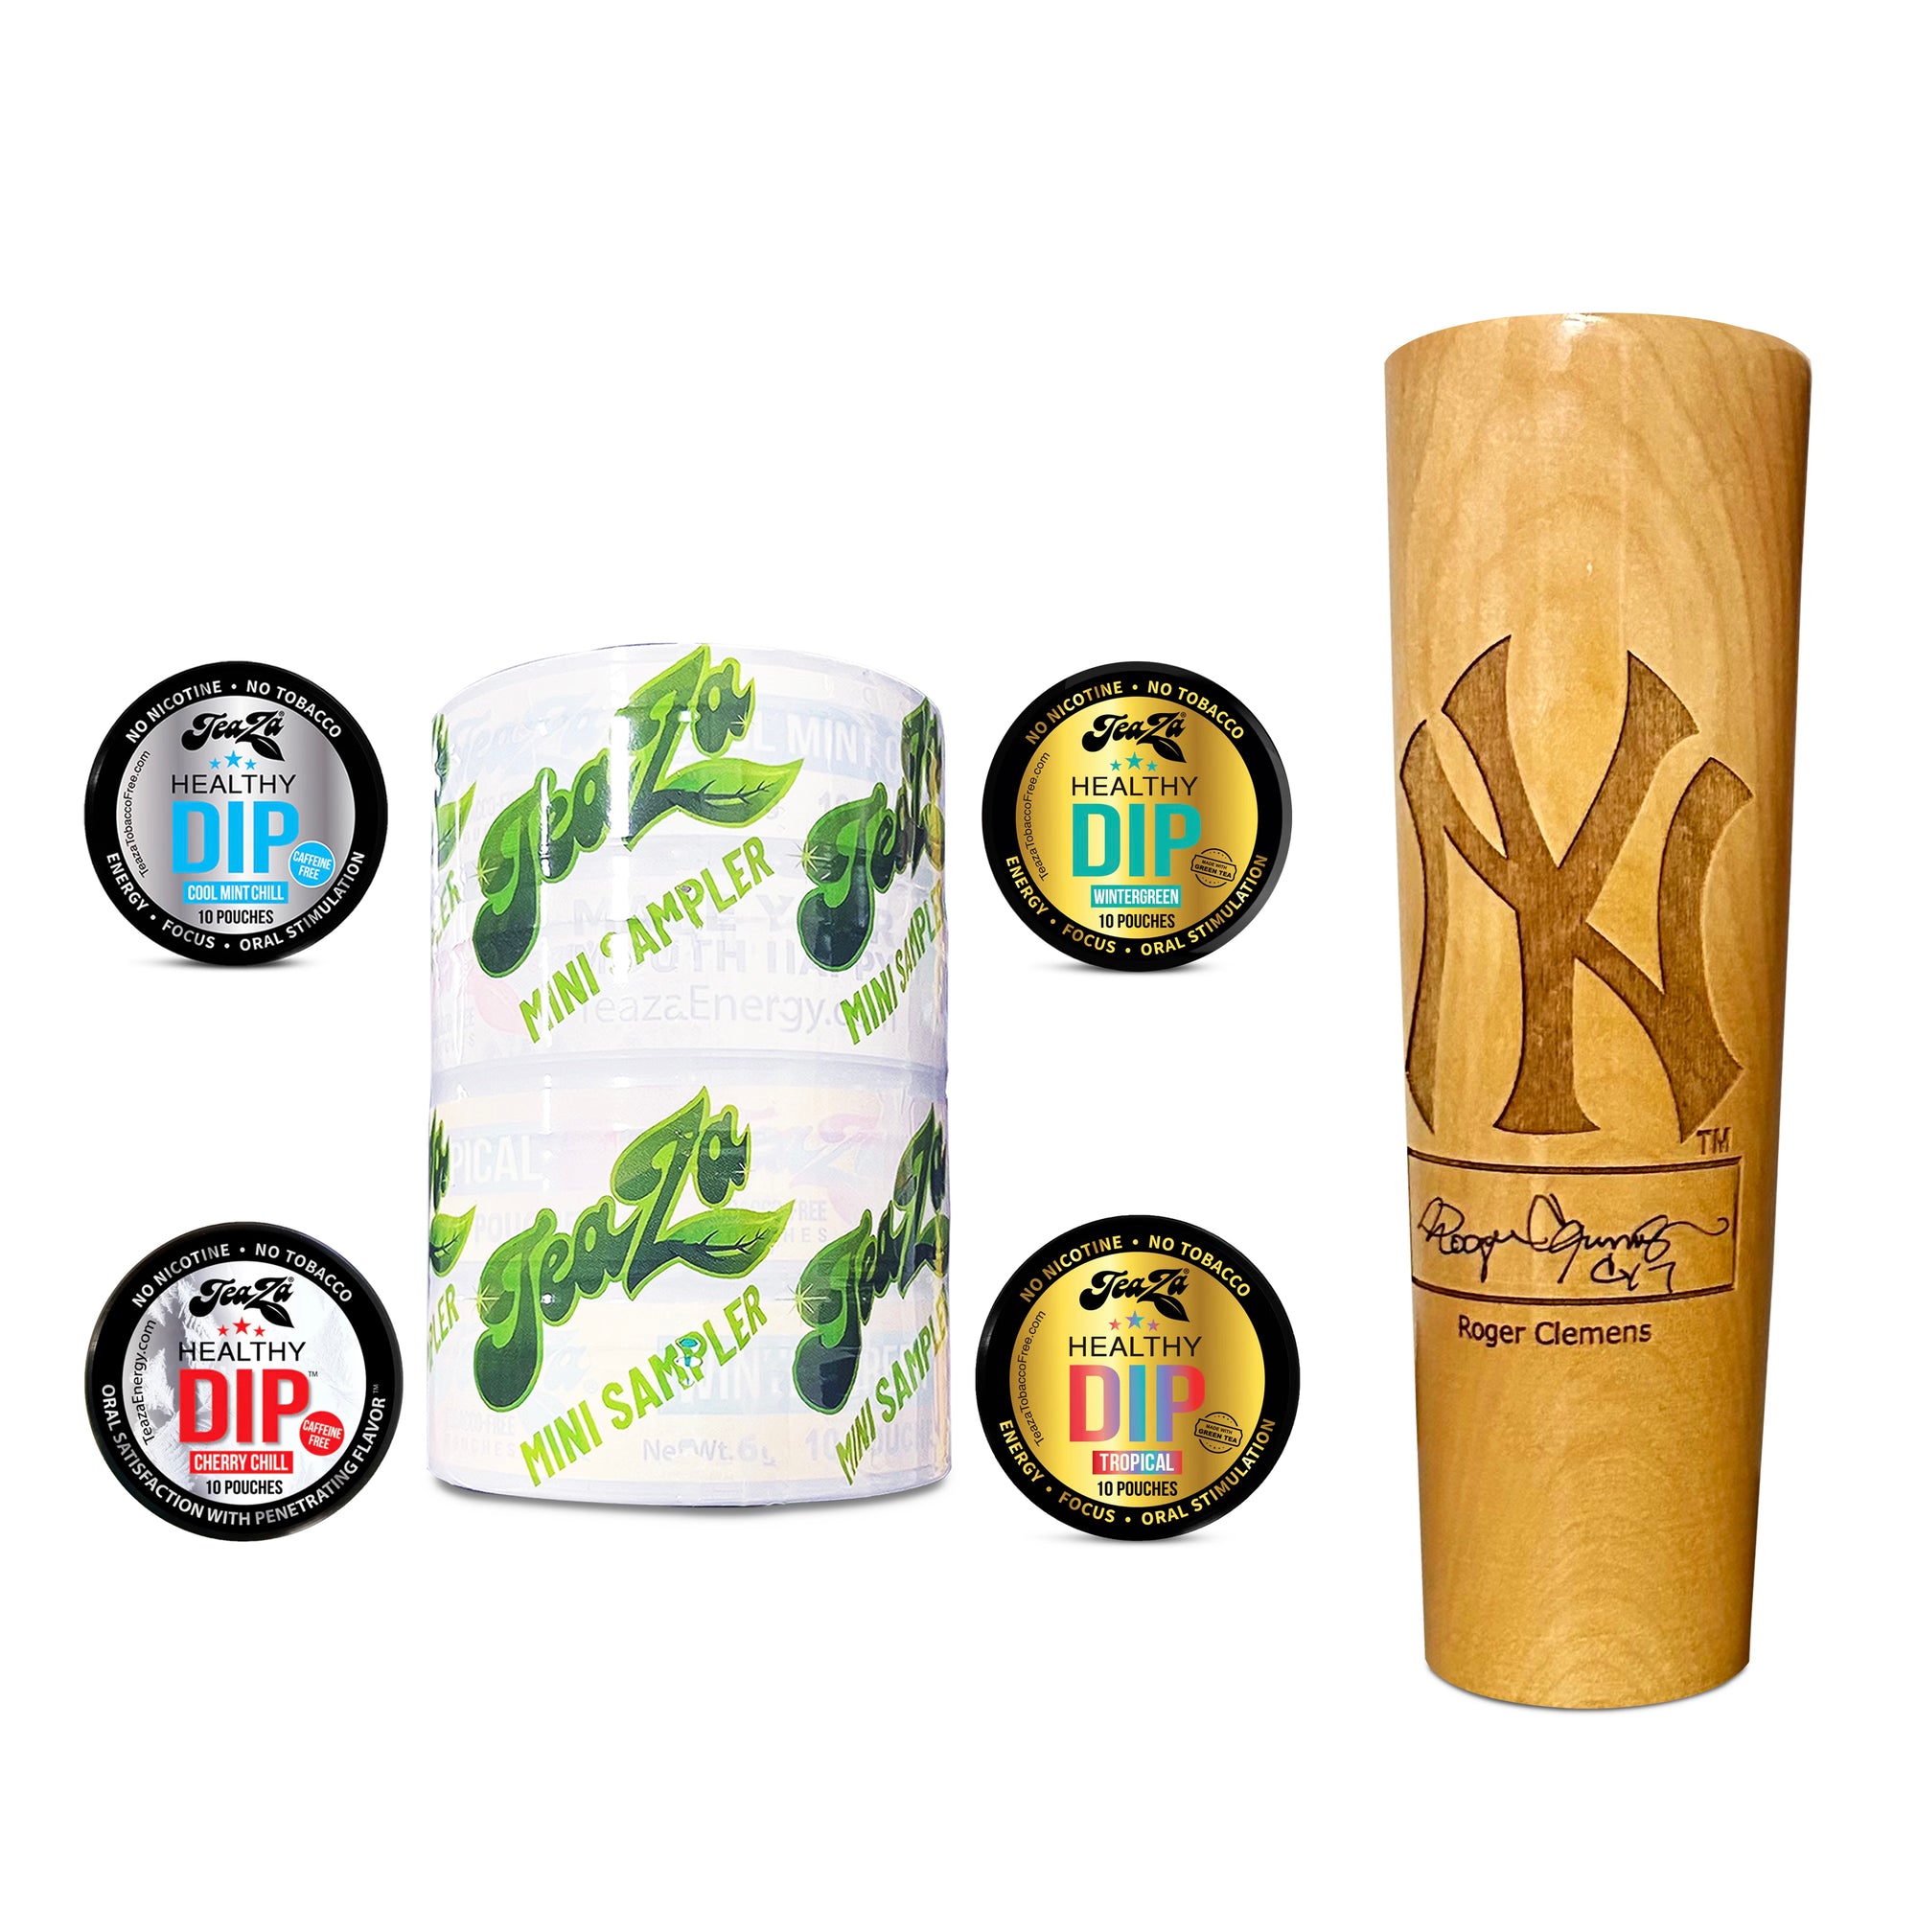 Mini Sampler with Limited-Edition Roger Clemens Dugout Mug